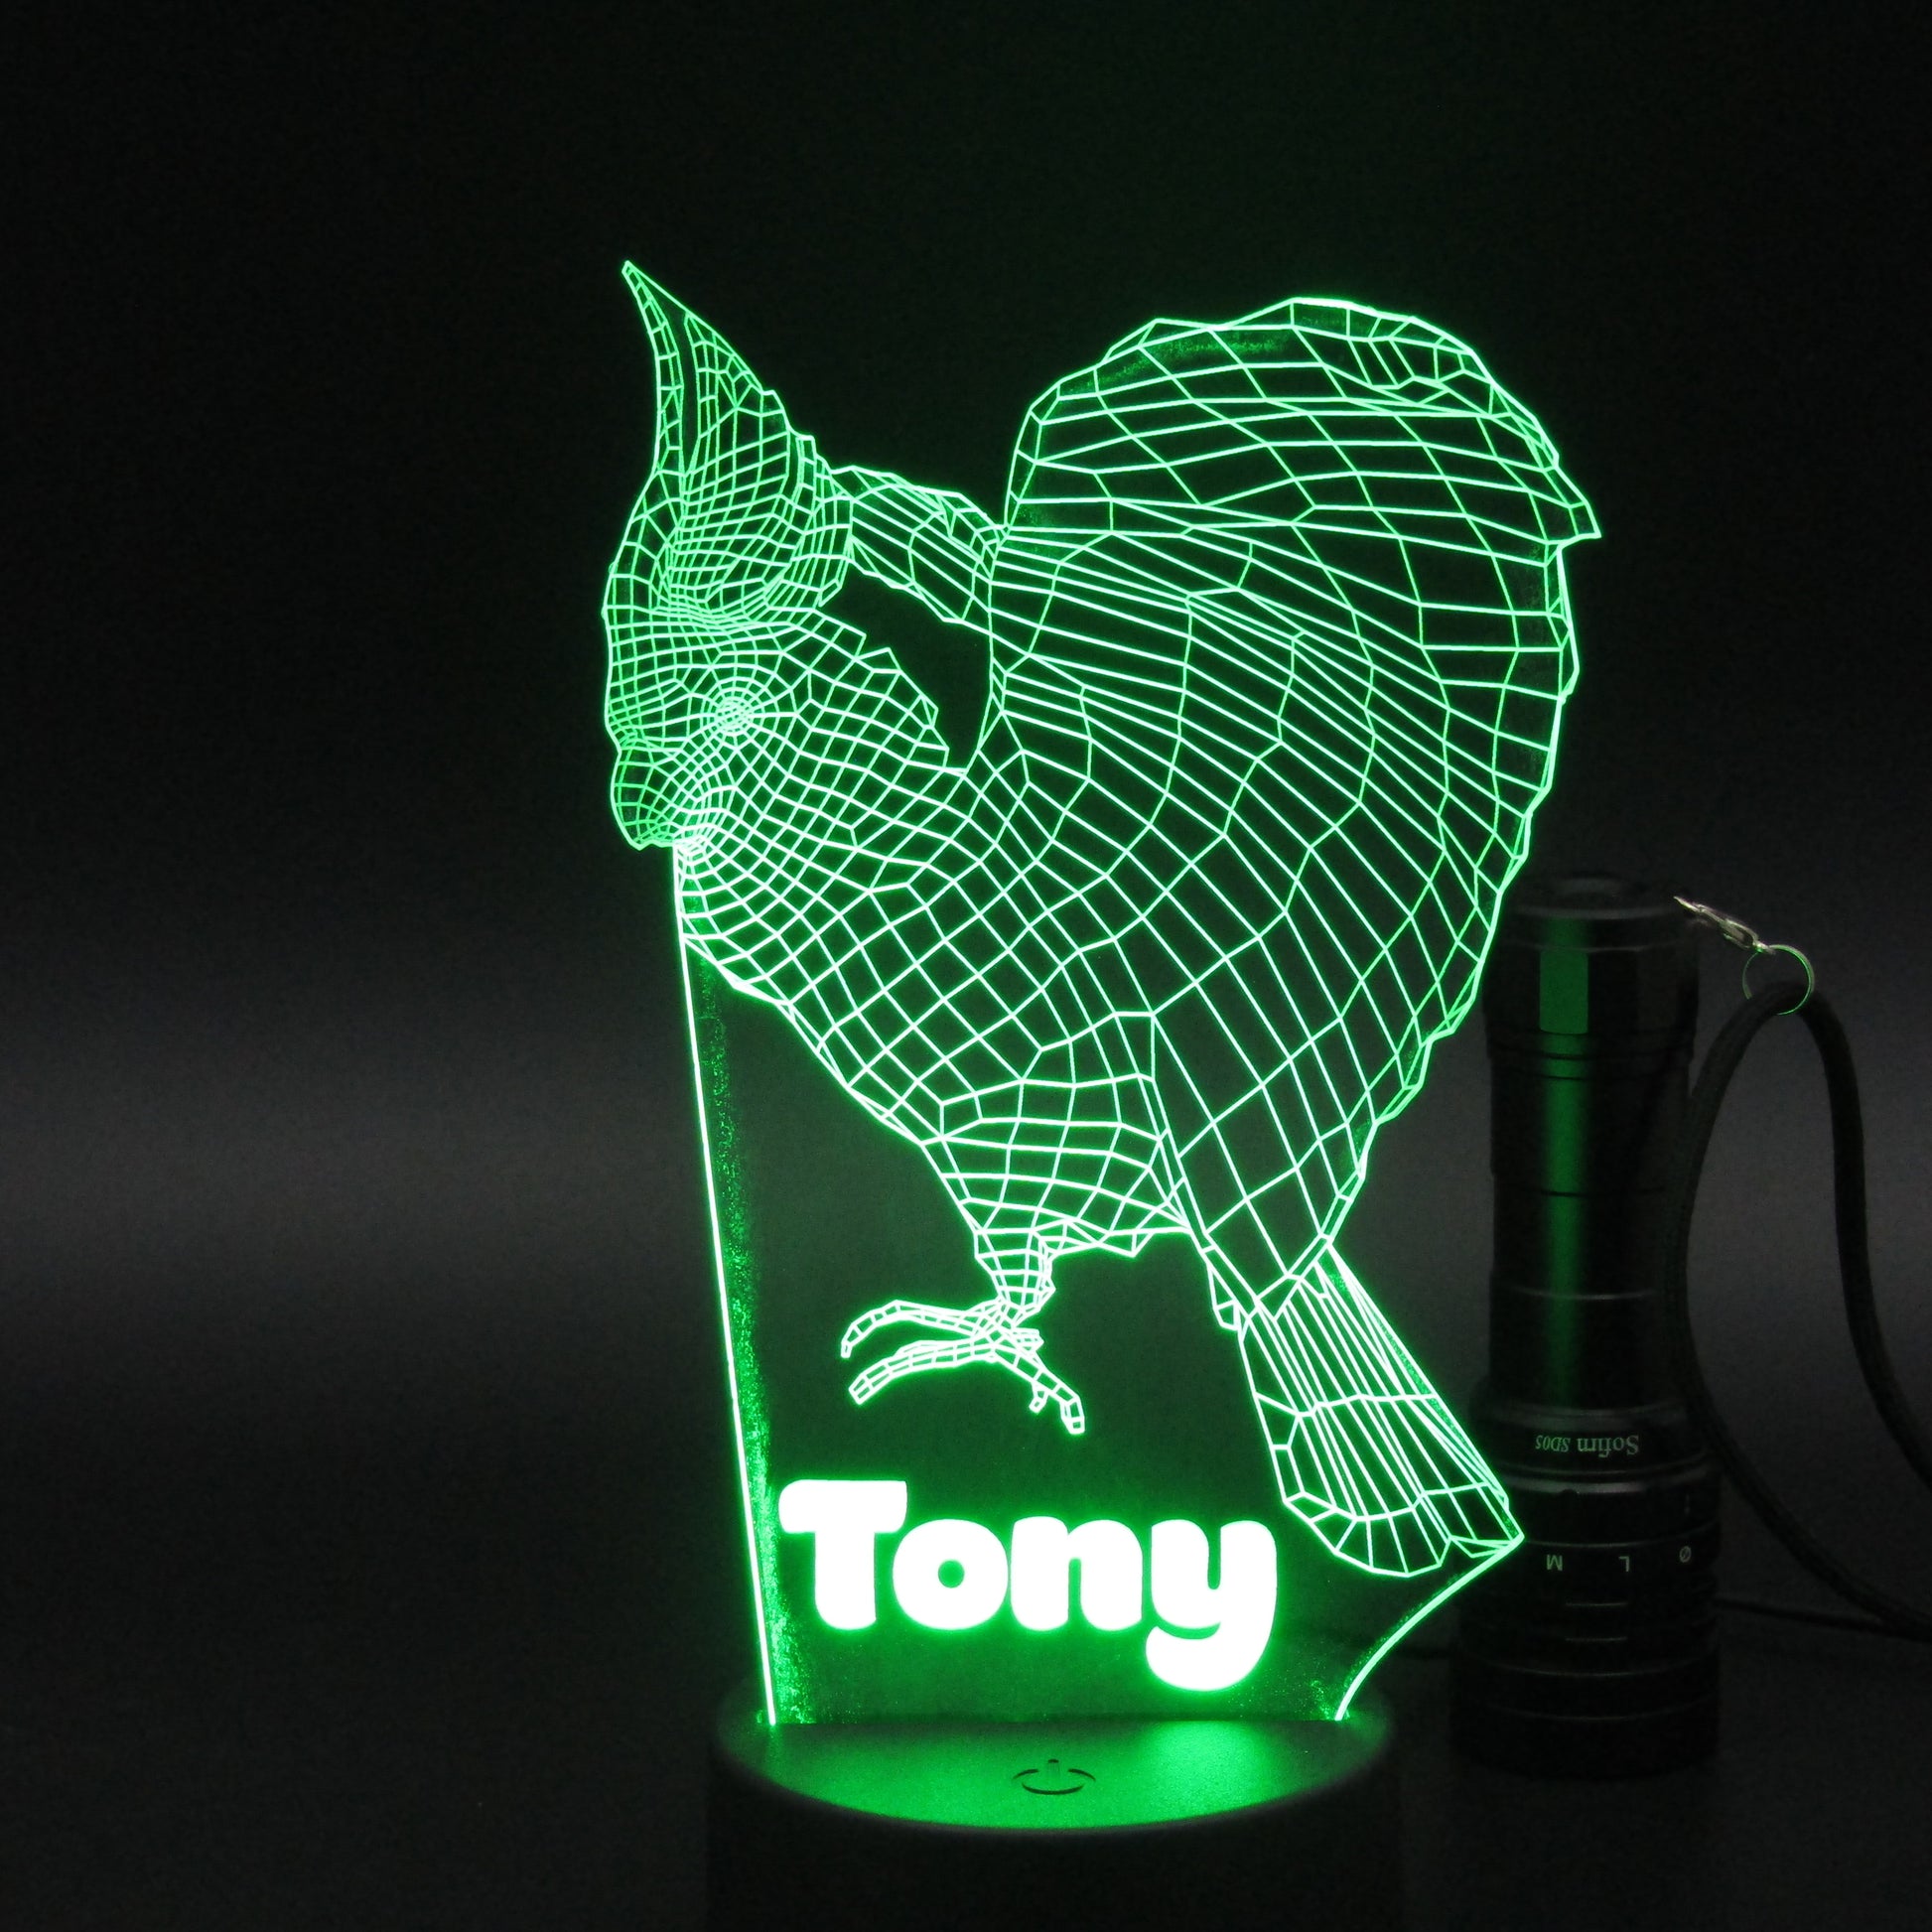 Personalized Rooster 3D night light